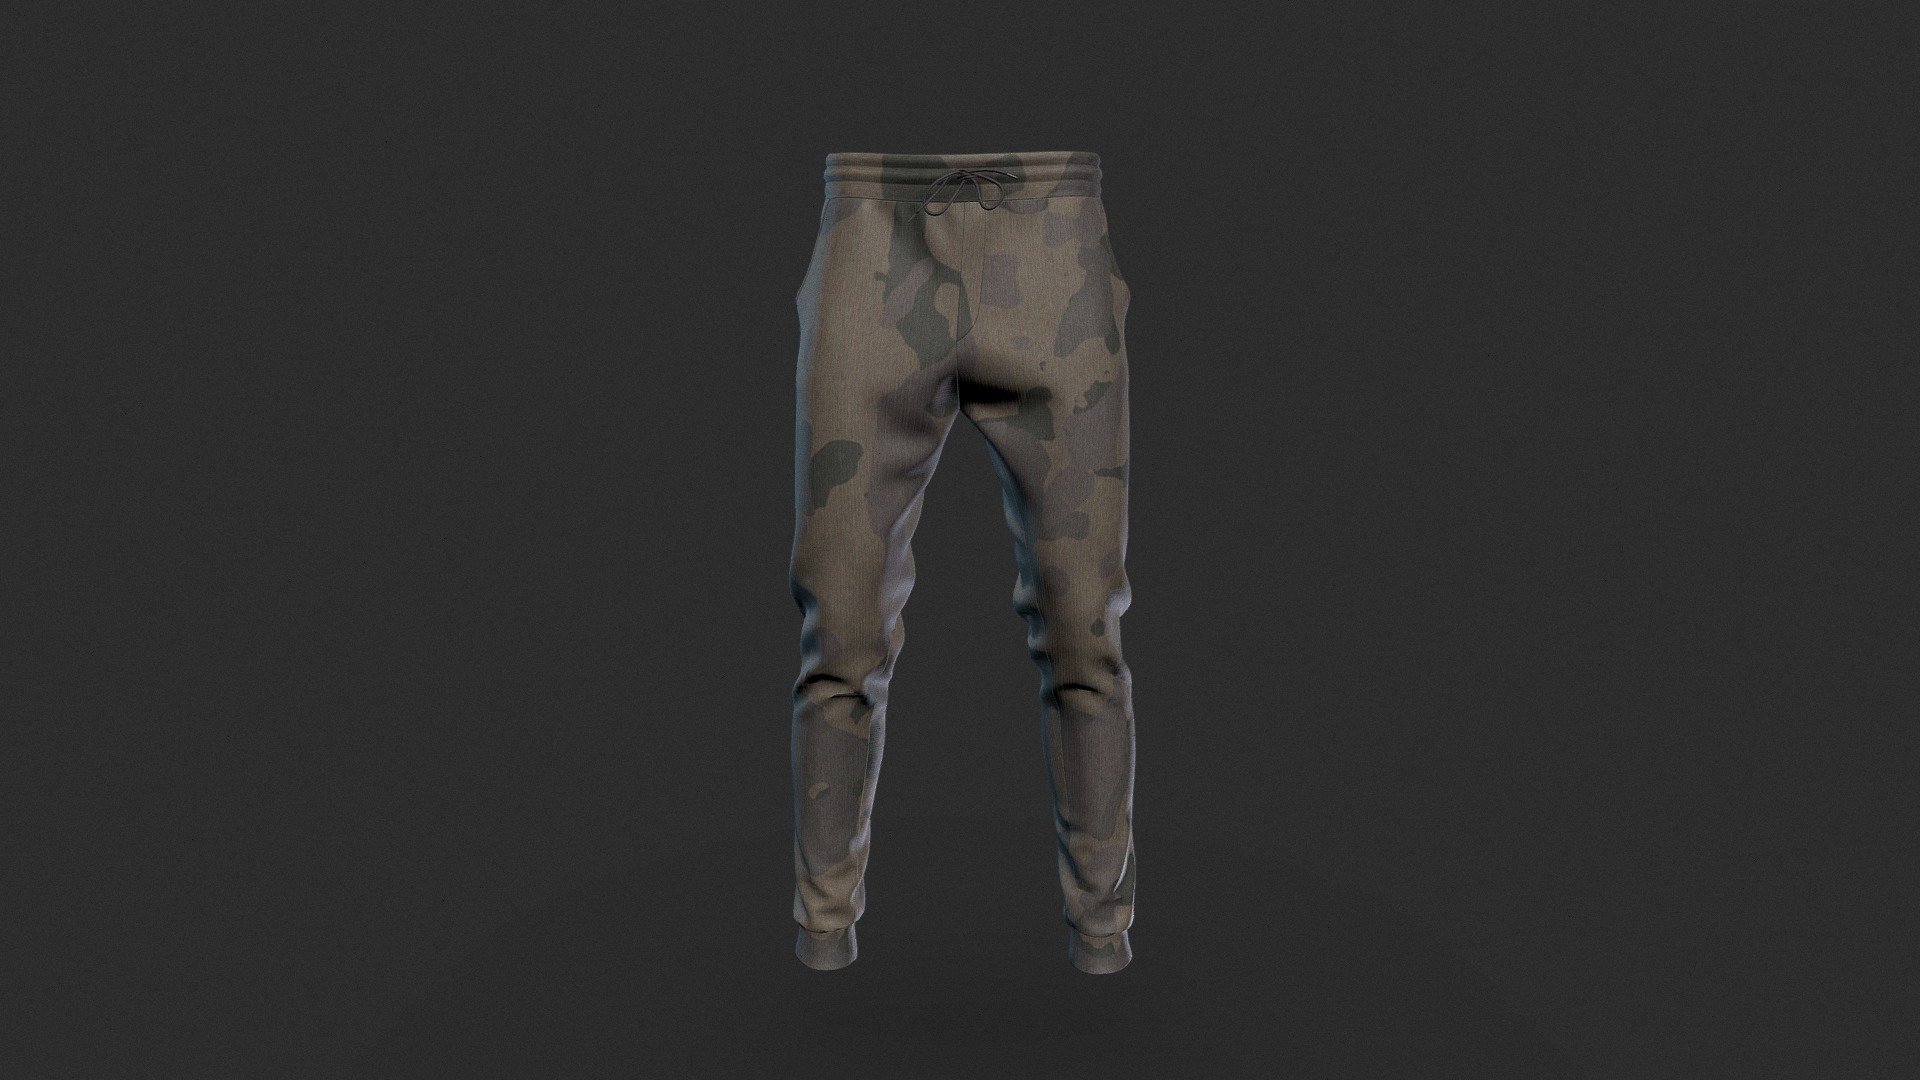 A detailed realistic model of sweatpants in camo design. Blend file included in the download 3d model